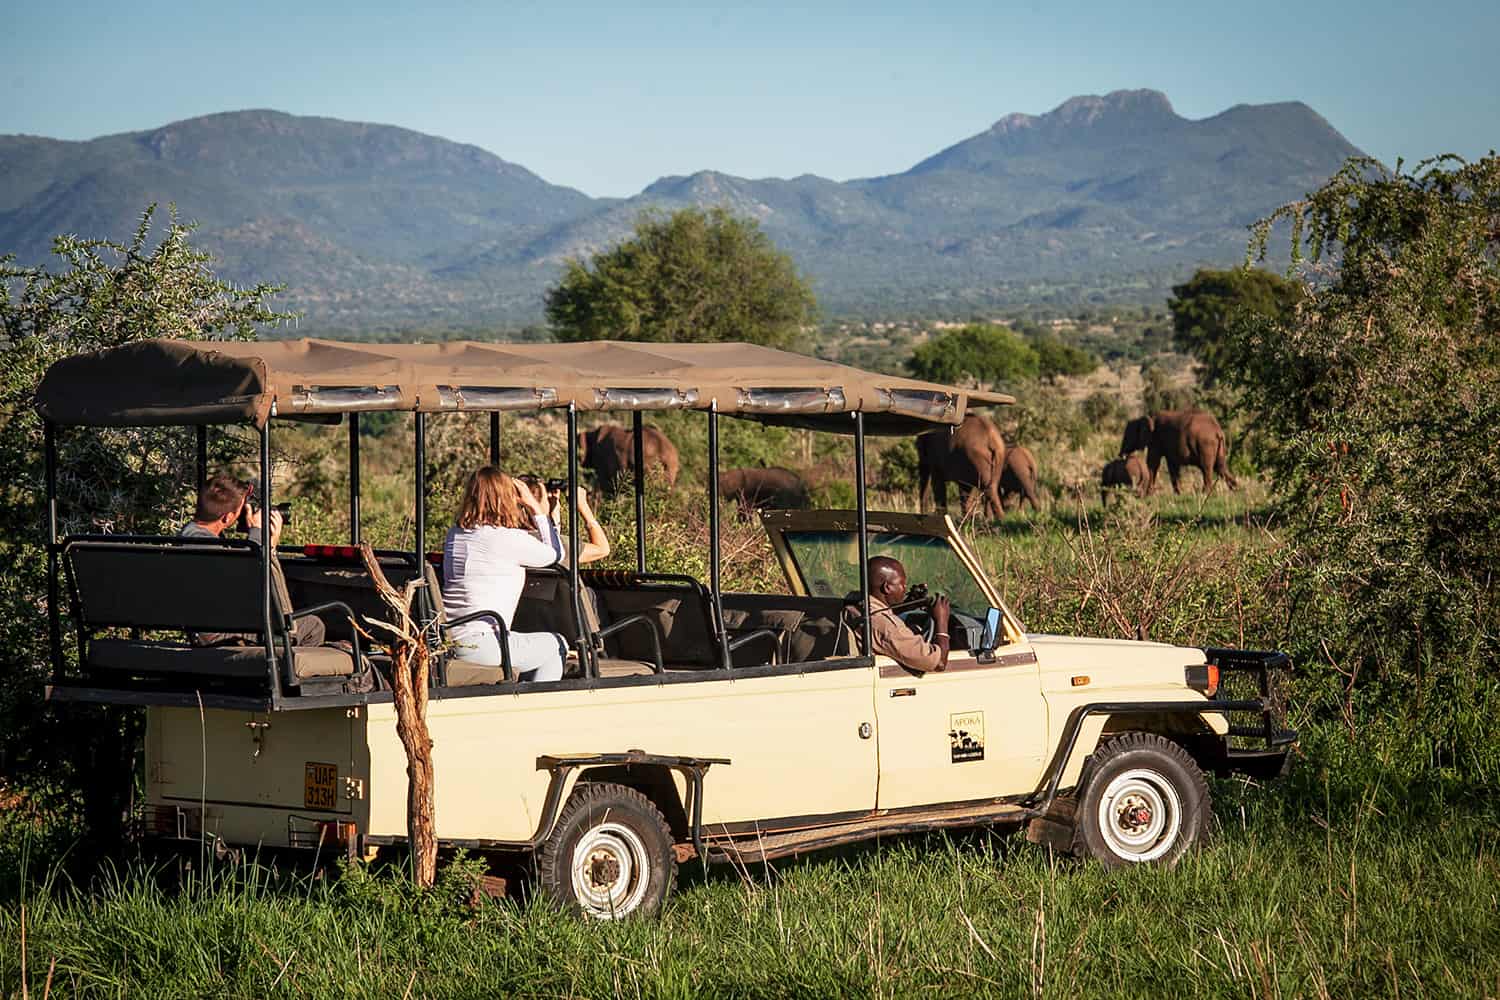 Game Drives To View The Diverse Wildlife Of Kidepo Valley